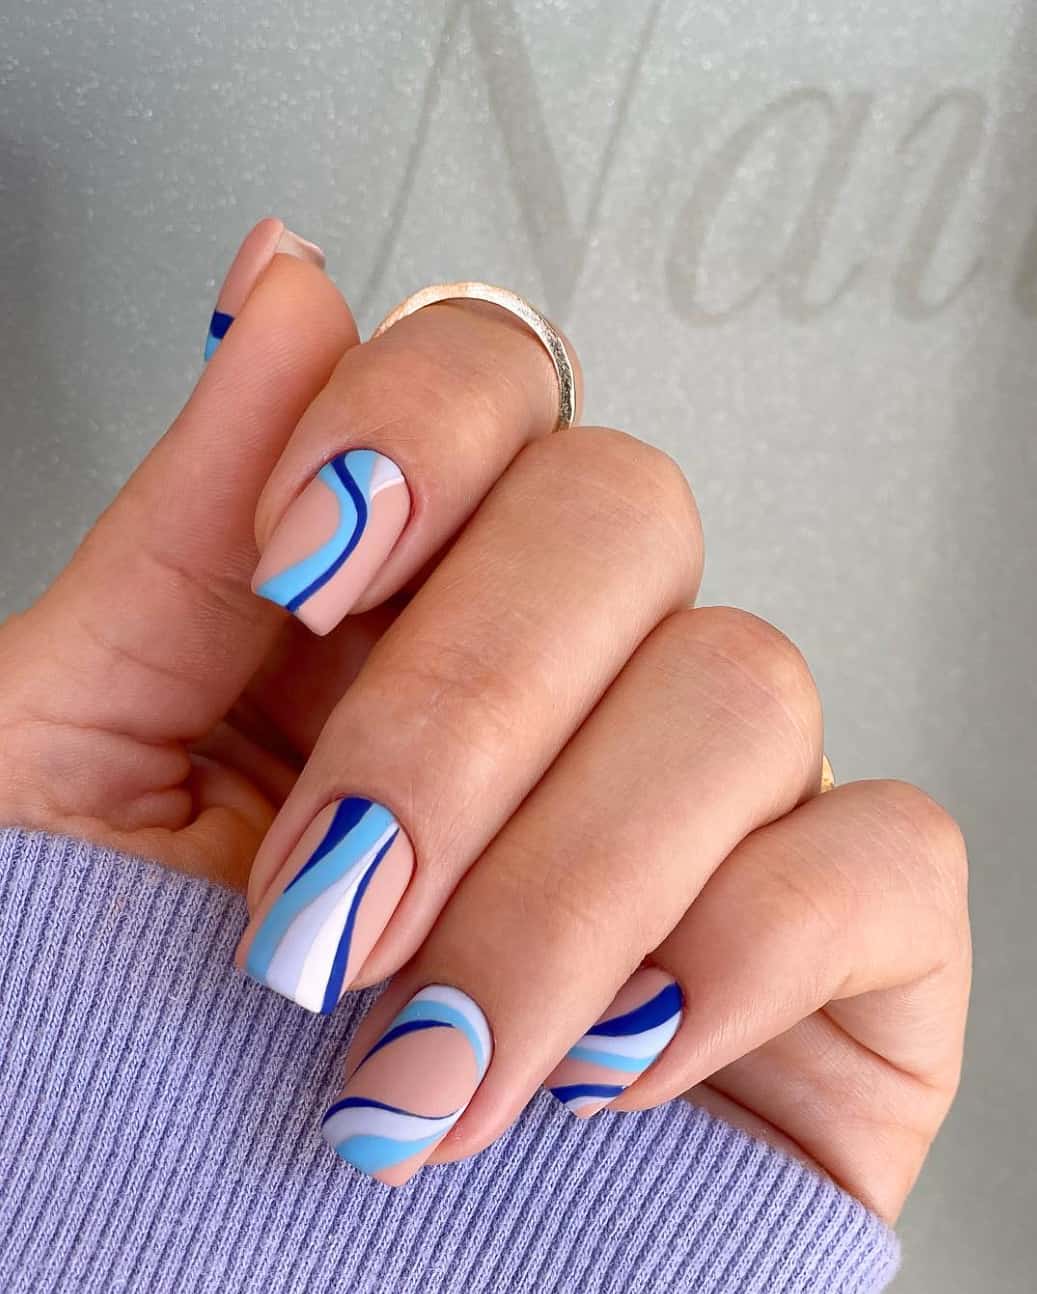 A hand with matte nude square nails featuring swirls in multiple shades of blue and white